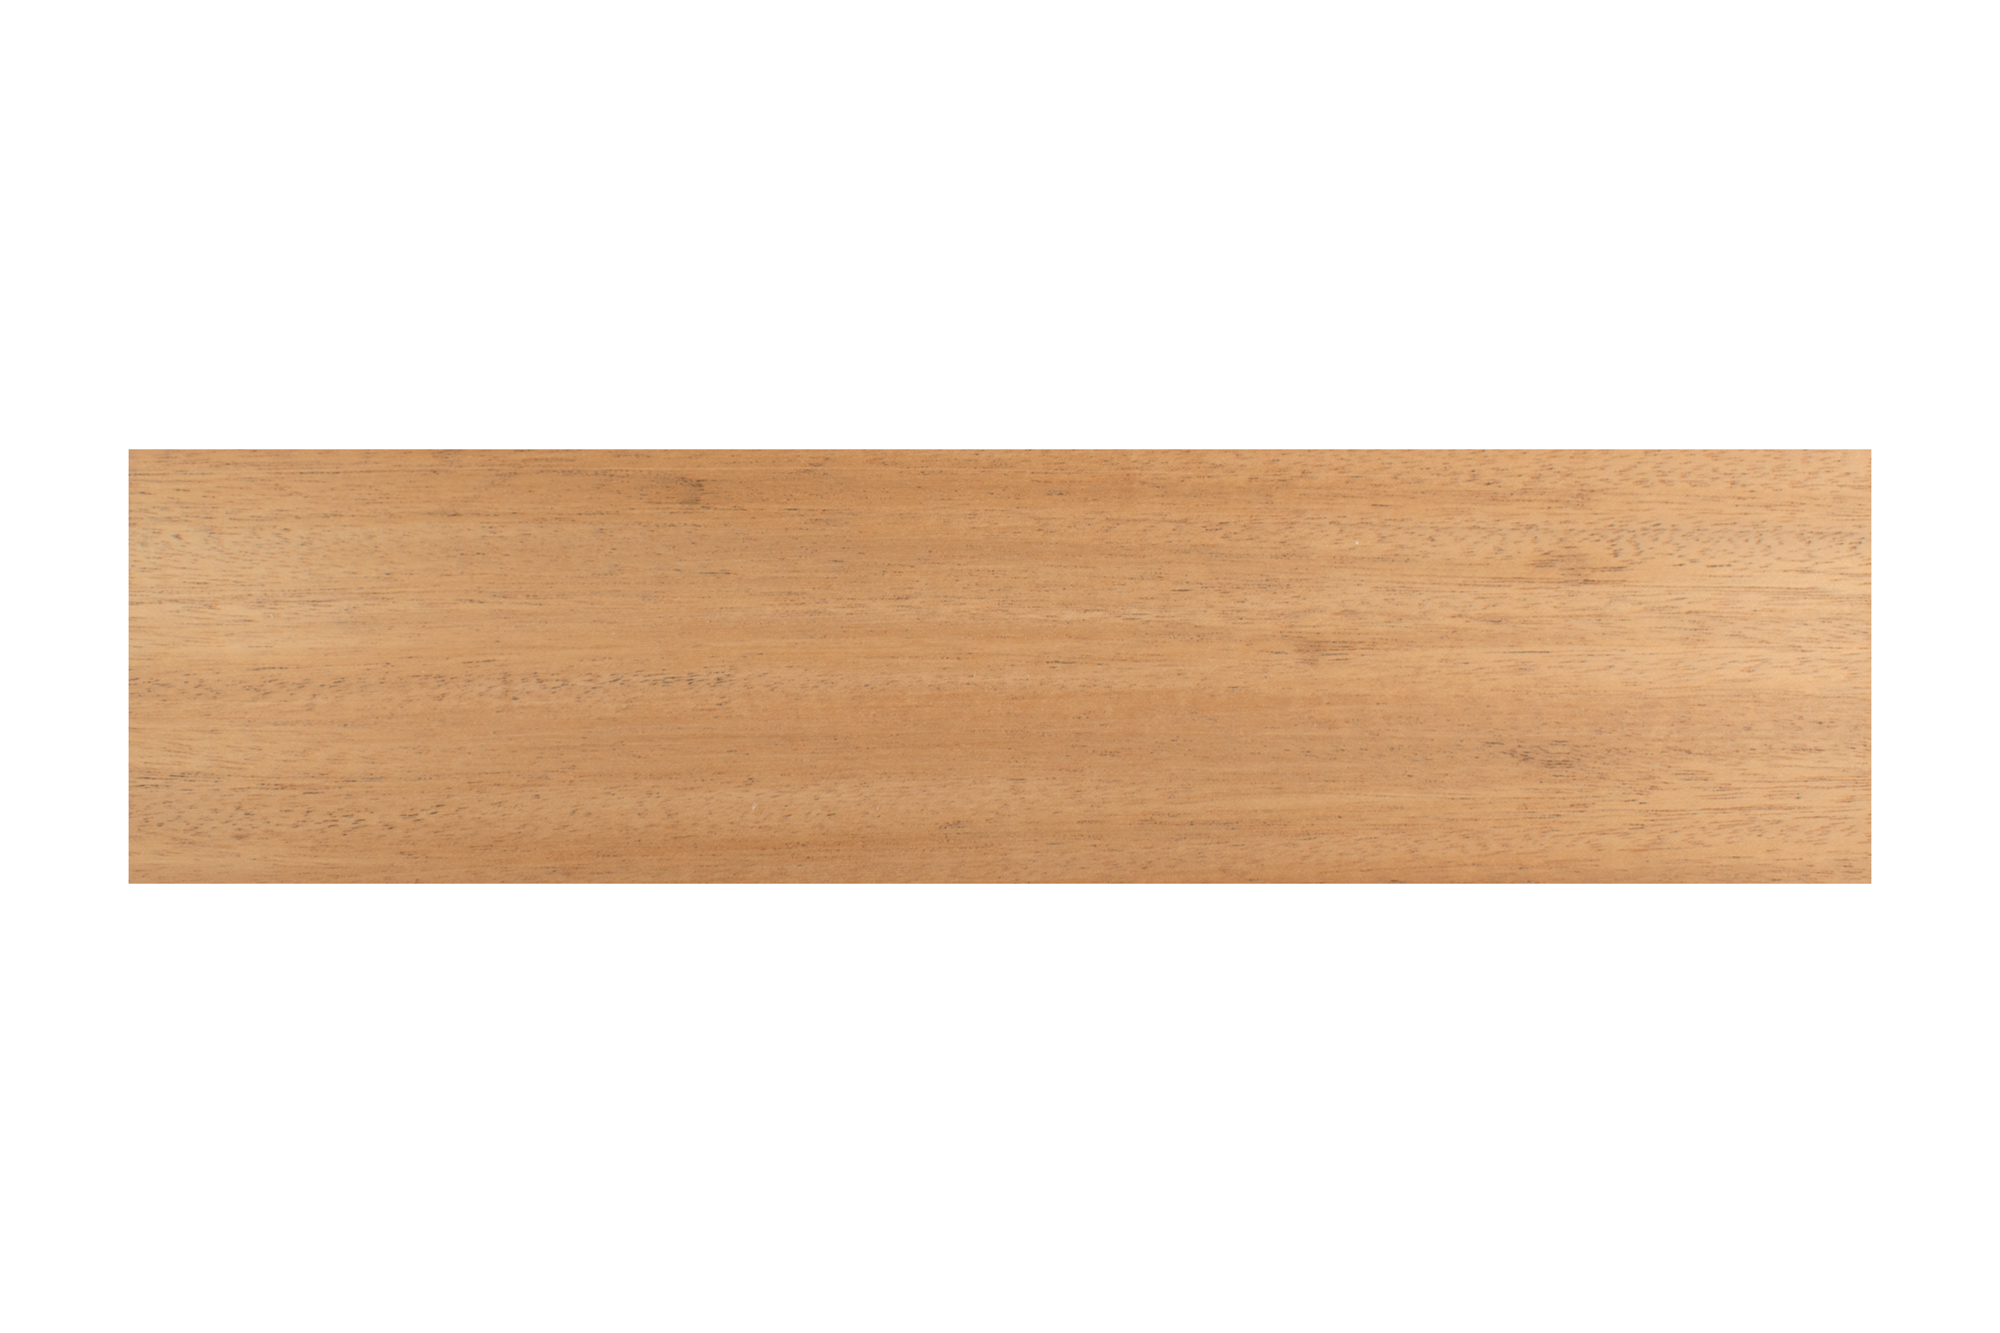 Small Wood craft board 1/4 inch thick